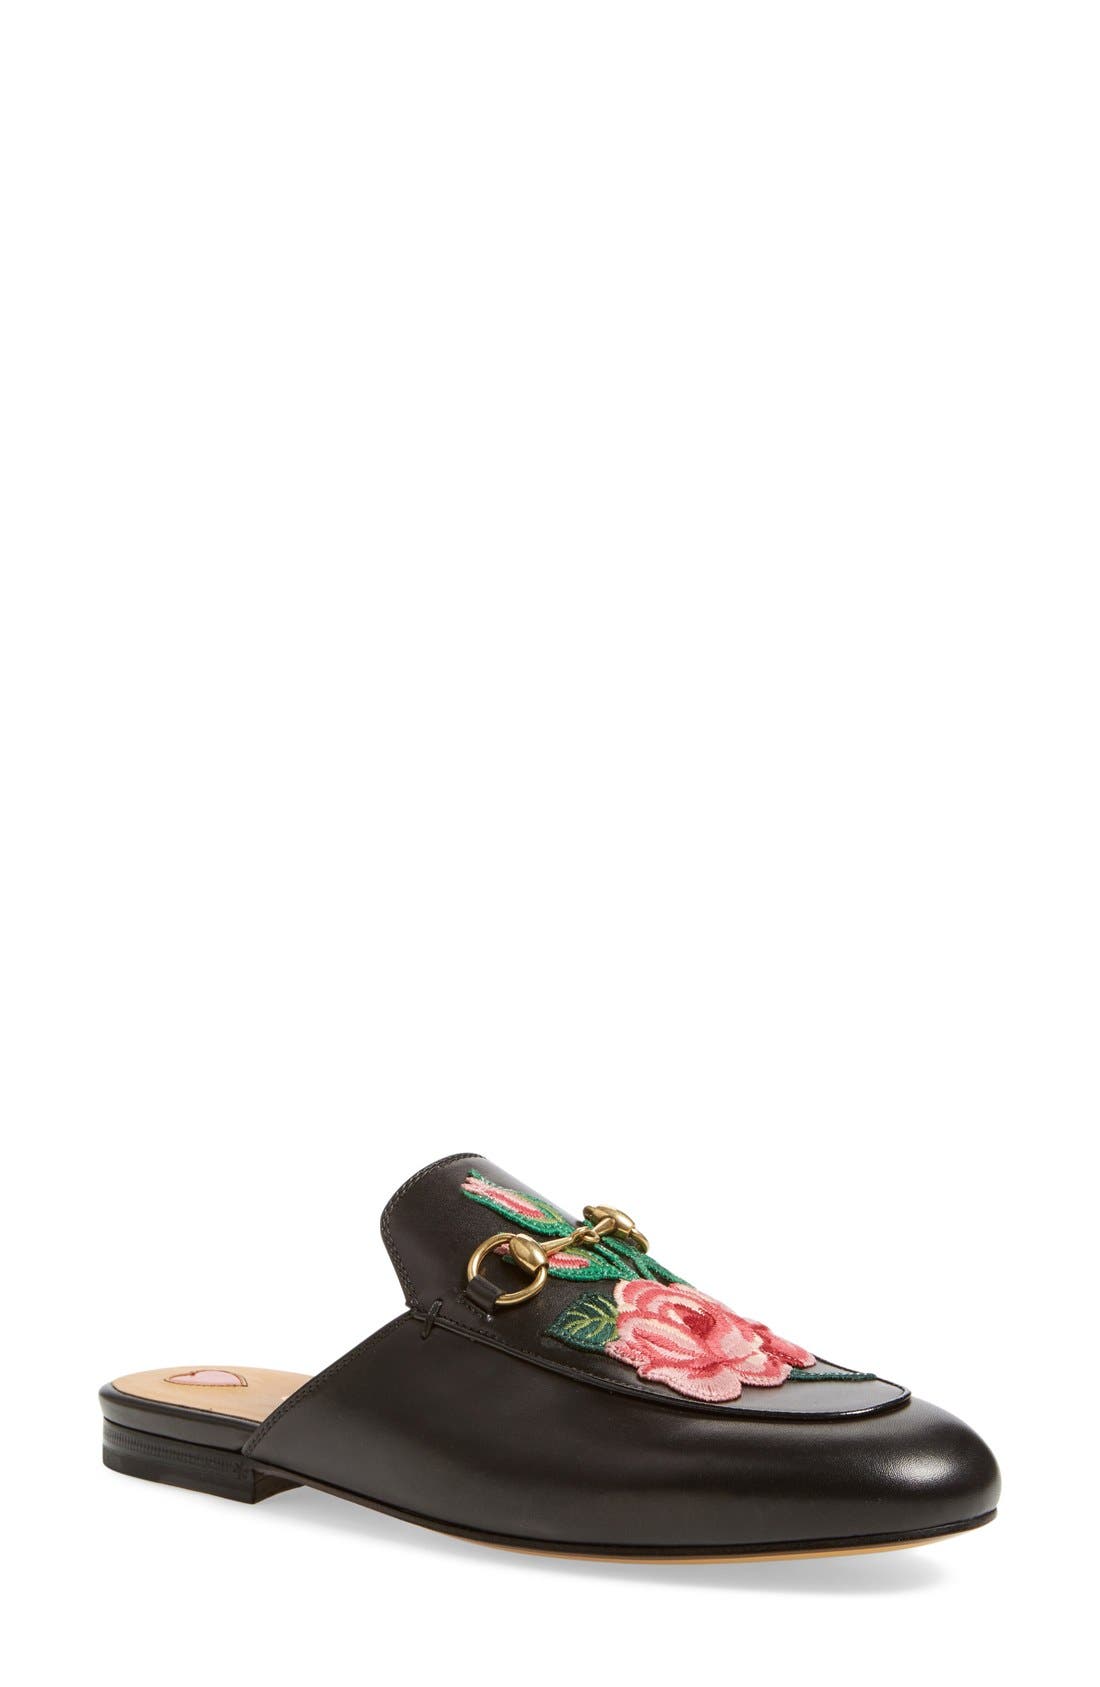 gucci princetown nordstrom